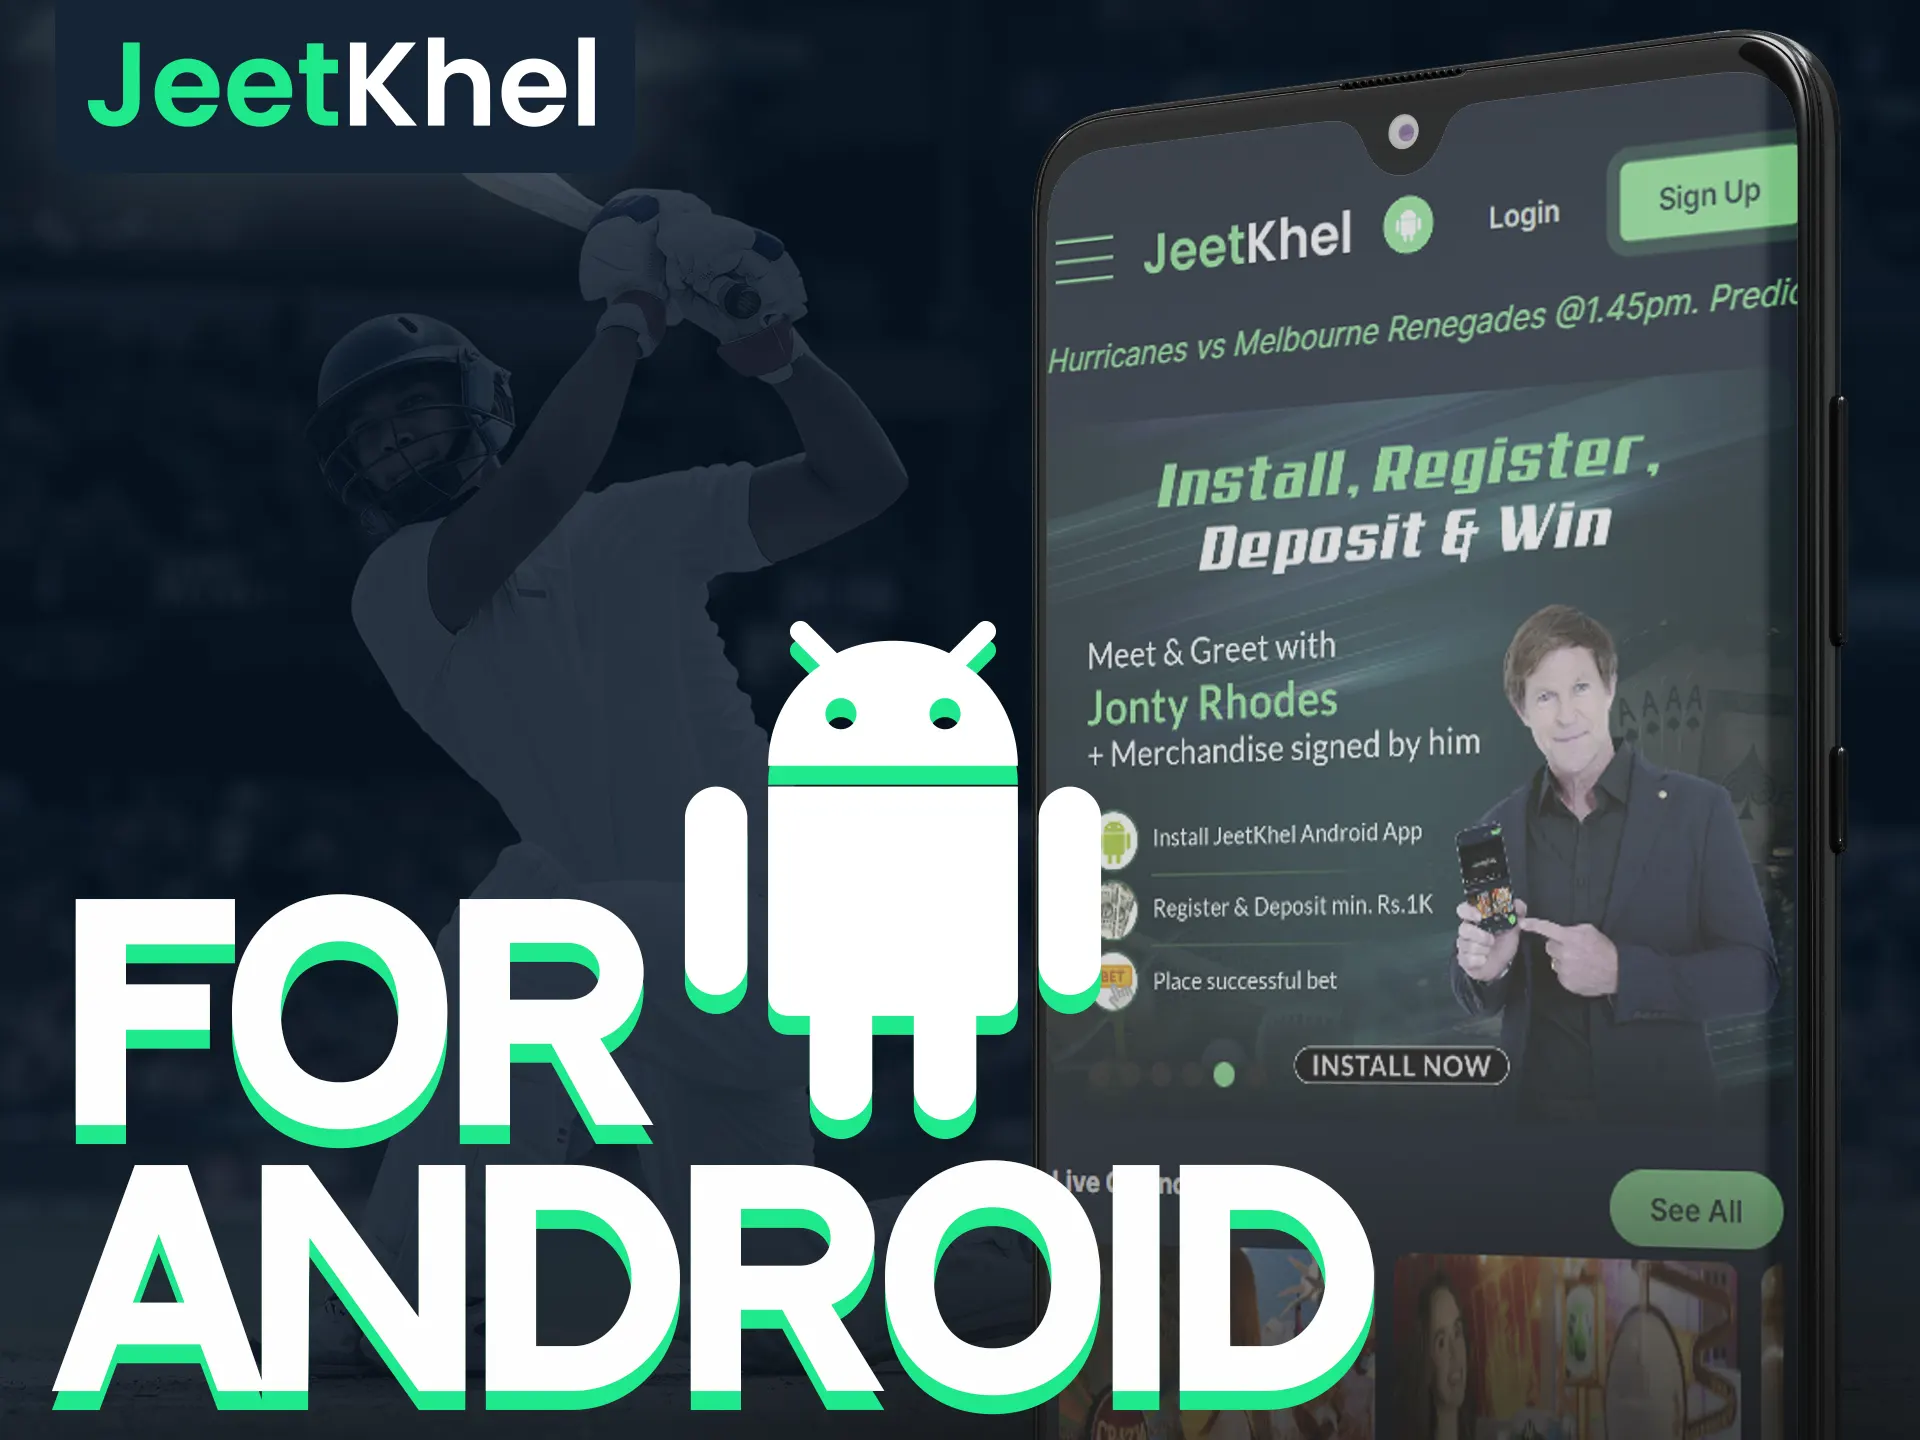 Start the process of installing the Jeetkhel app on your Android device.